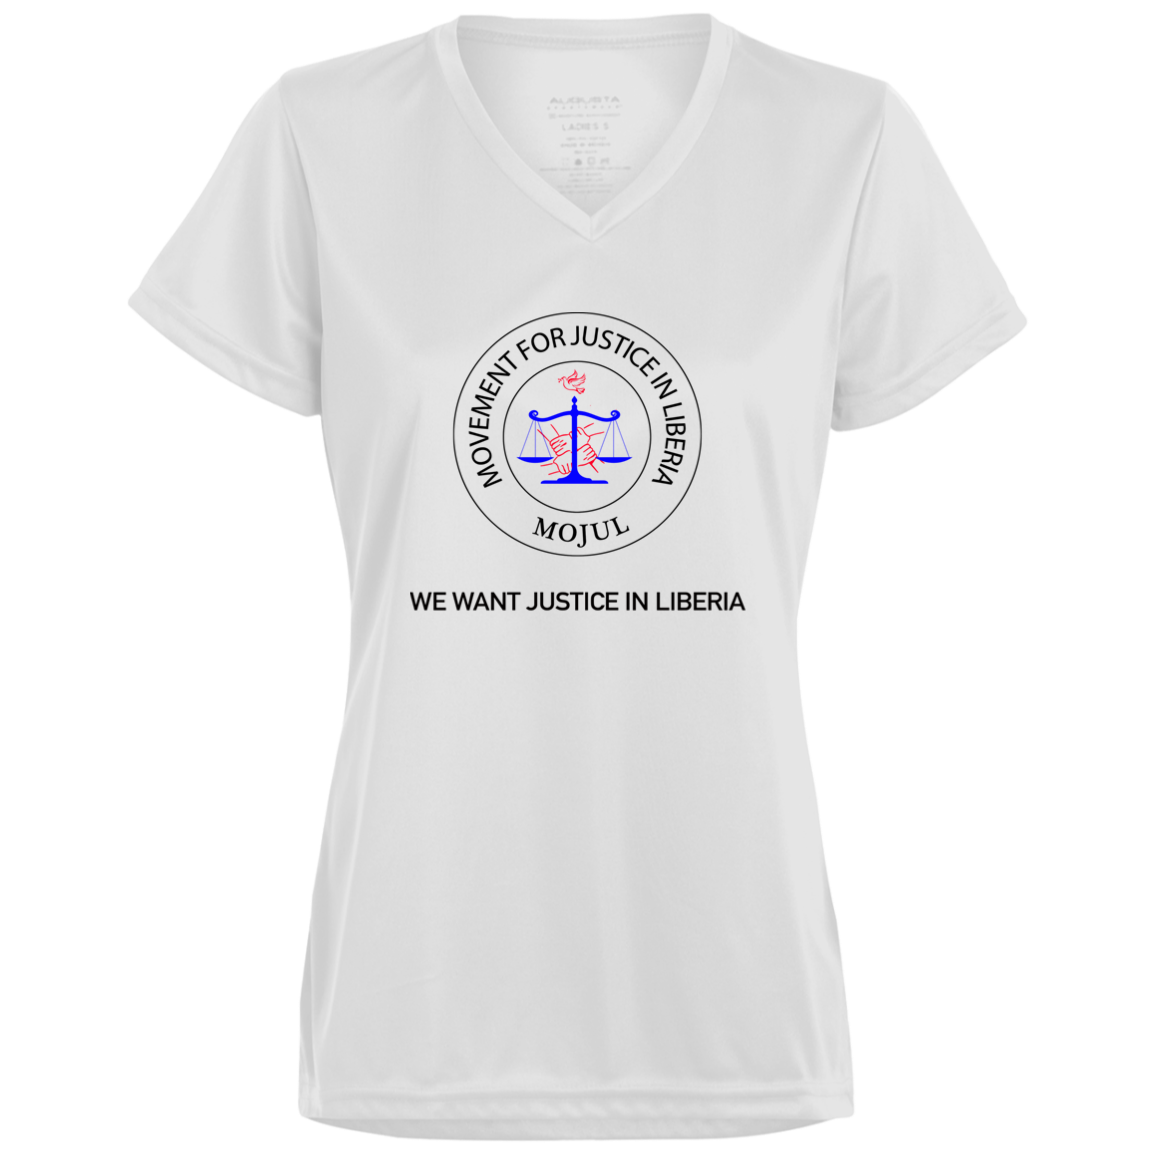 MOJUL/We Want Justice In Liberia Ladies' Wicking T-Shirt